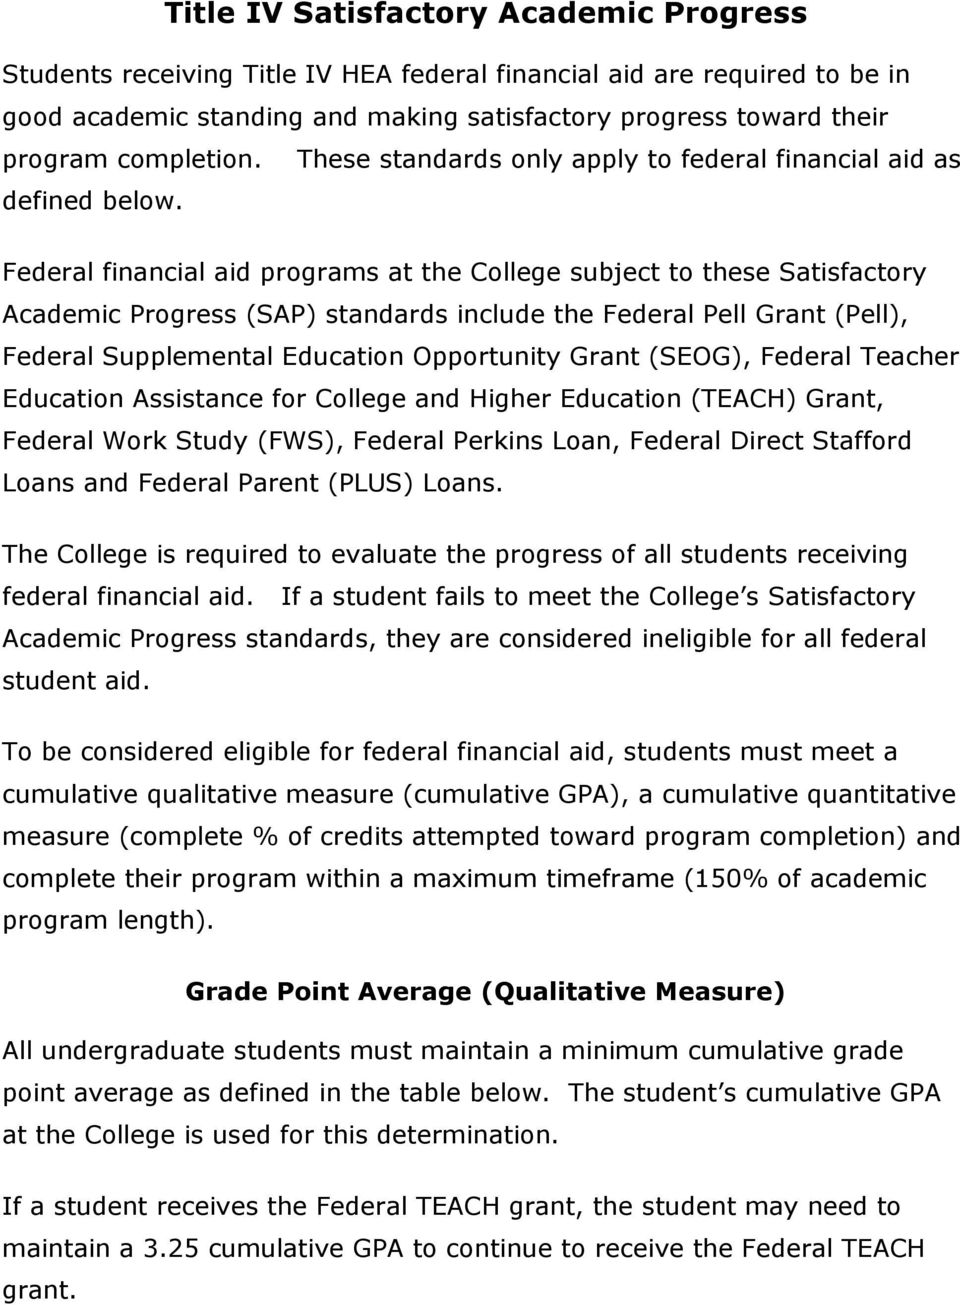 Federal financial aid programs at the College subject to these Satisfactory Academic Progress (SAP) standards include the Federal Pell Grant (Pell), Federal Supplemental Education Opportunity Grant